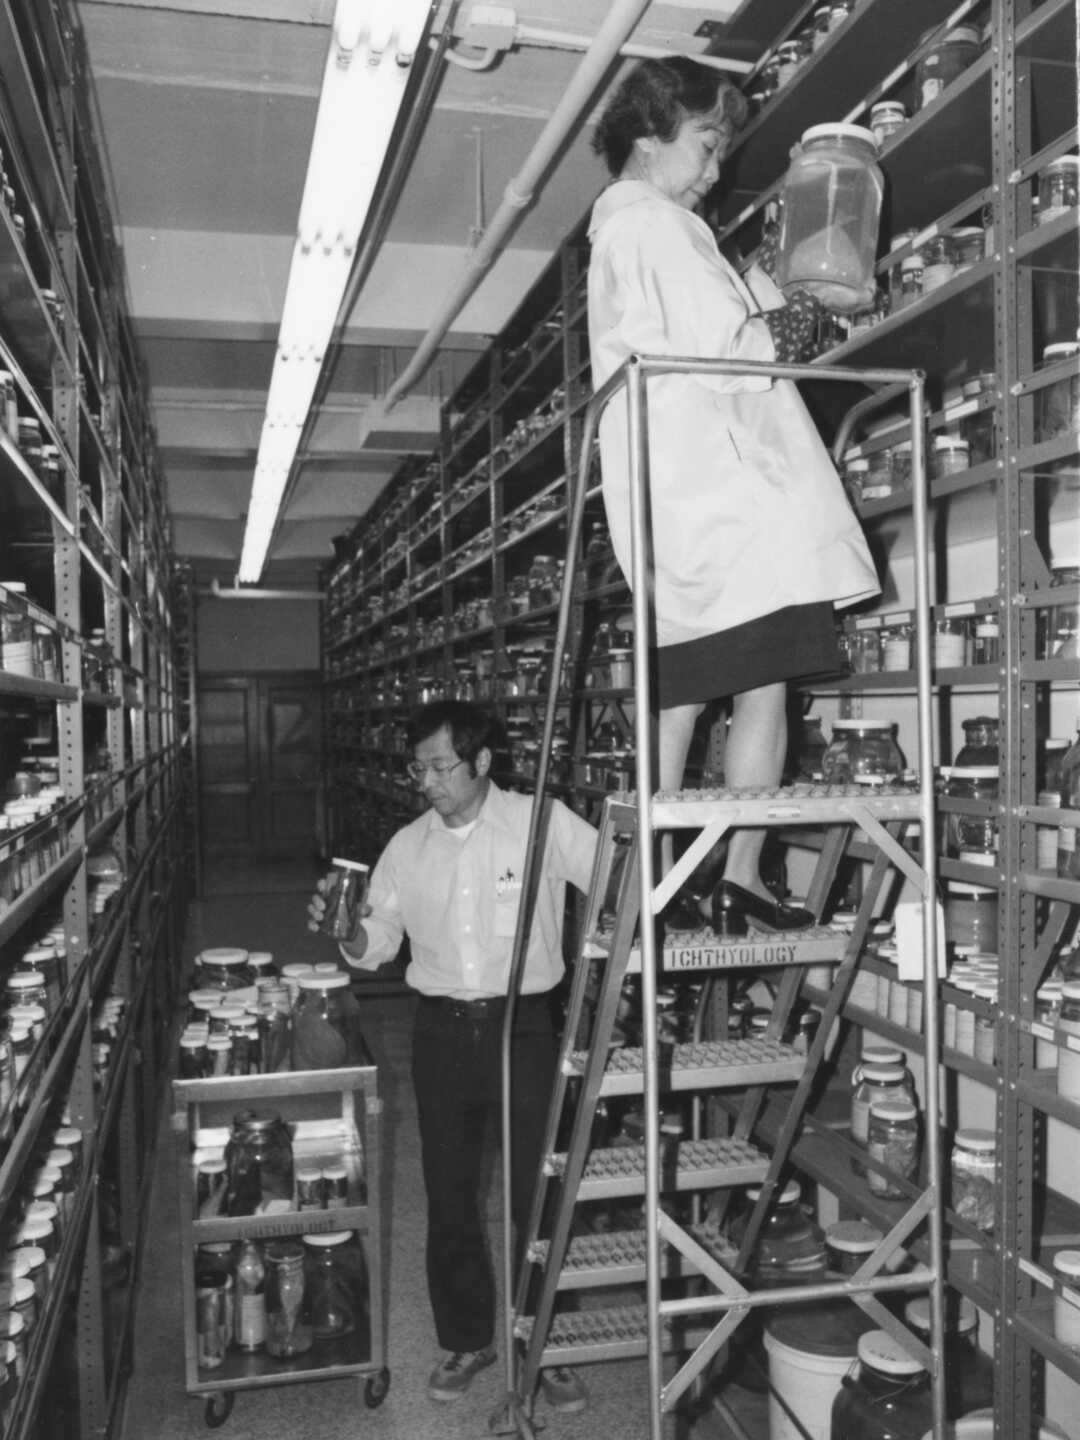 Pearl Sonoda stands atop a ladder in the fish collections aisles, holding a jar full of speccimens and wearing a white lab coat. Her colleague Tomio Iwamoto stands on the ground beneath her. 